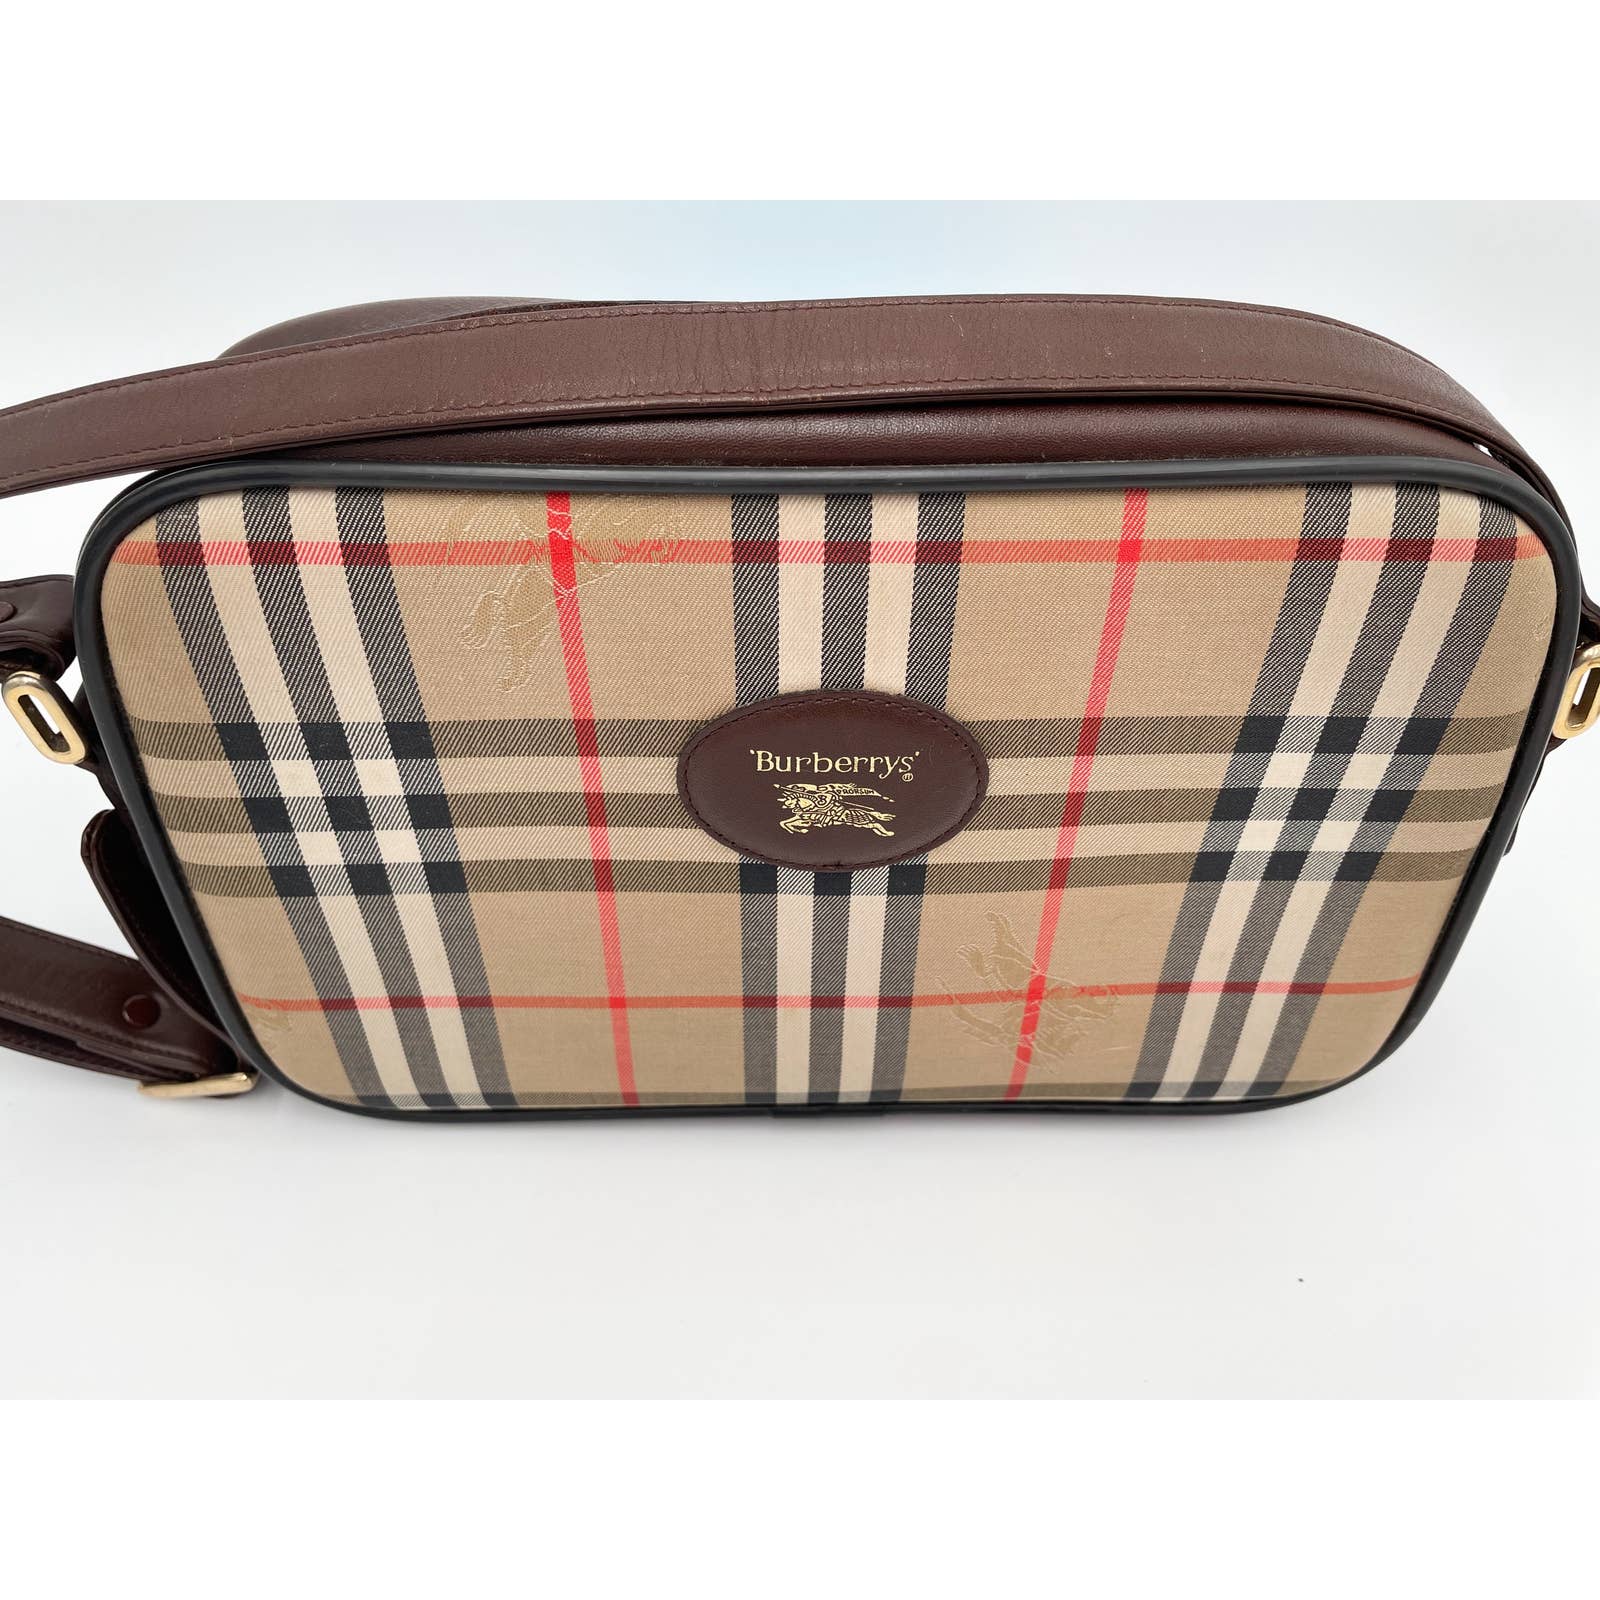 A rectangular vintage Burberry Crossbody Bag featuring the classic beige, black, white, and red pattern. The bag has a brown leather trim and adjustable strap, with an oval brown leather patch on the front displaying the "Burberry's" logo and equestrian knight emblem.